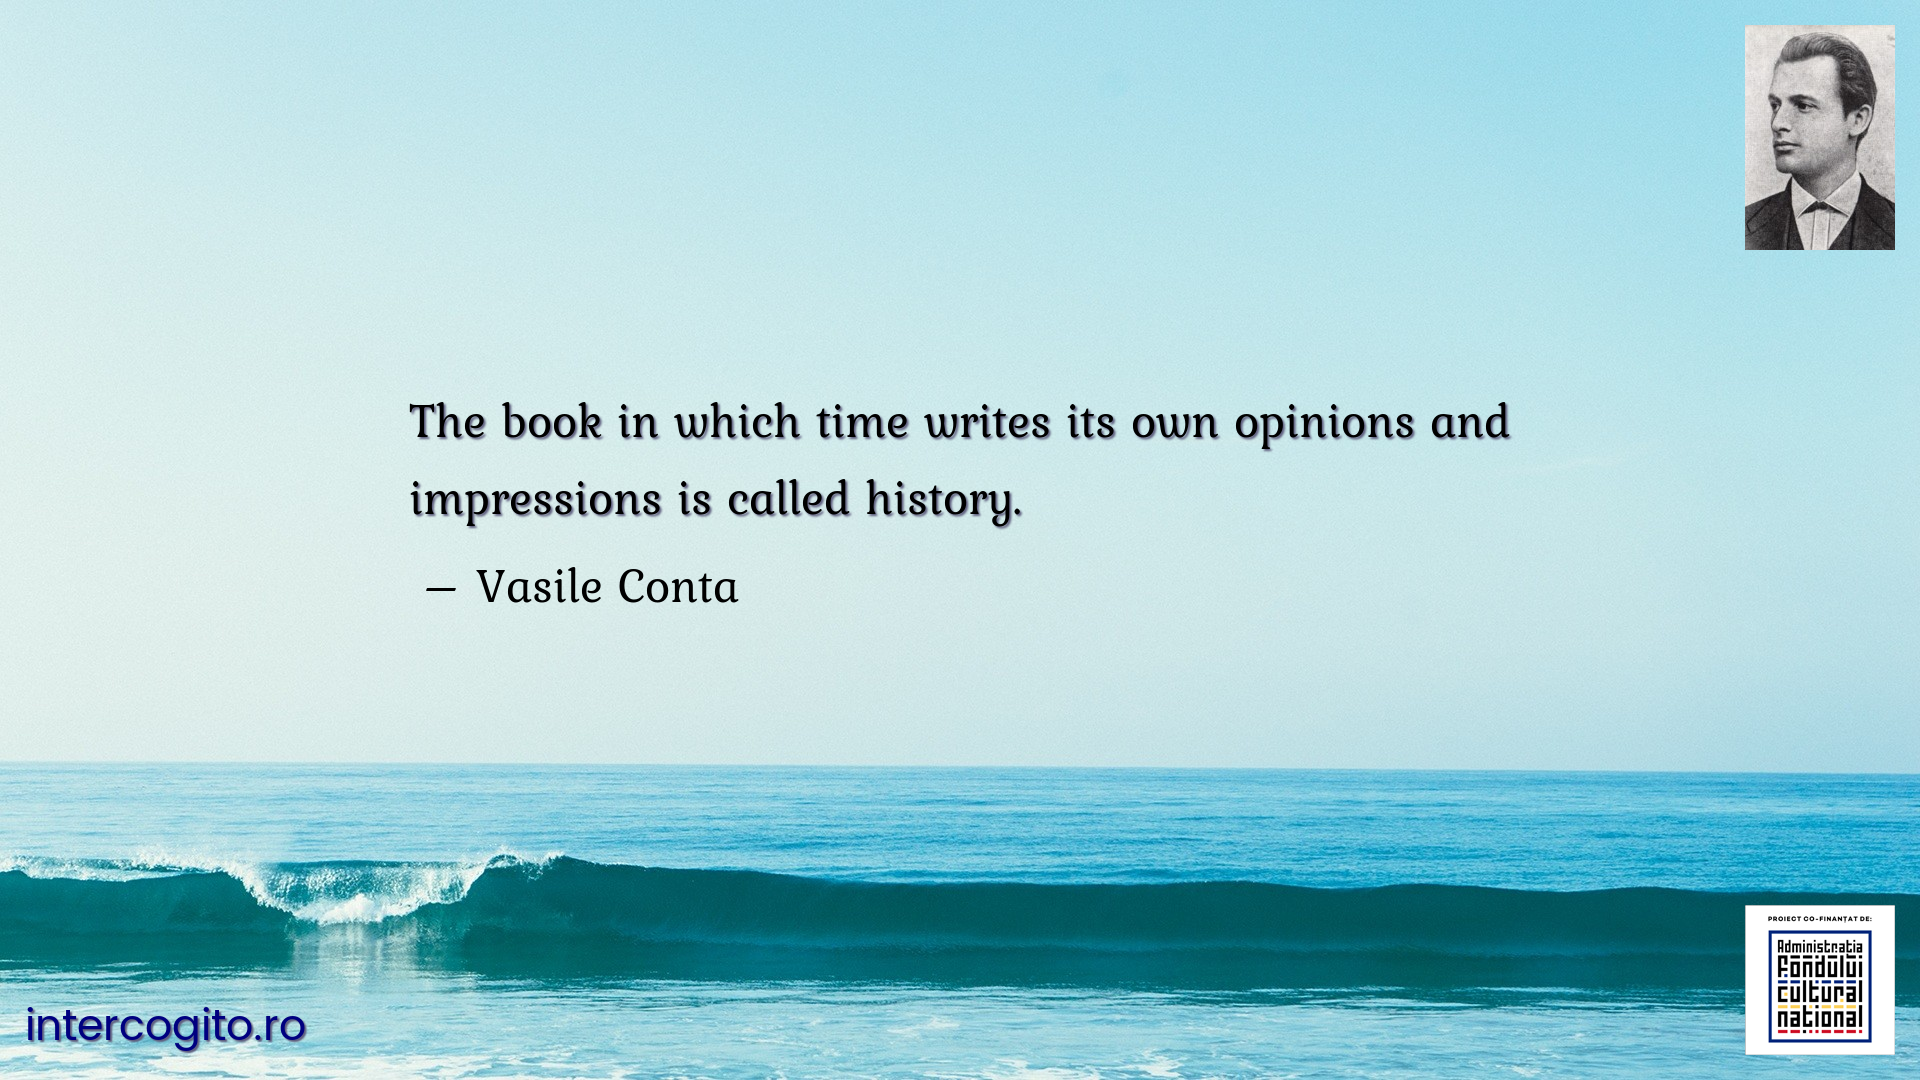 The book in which time writes its own opinions and impressions is called history.